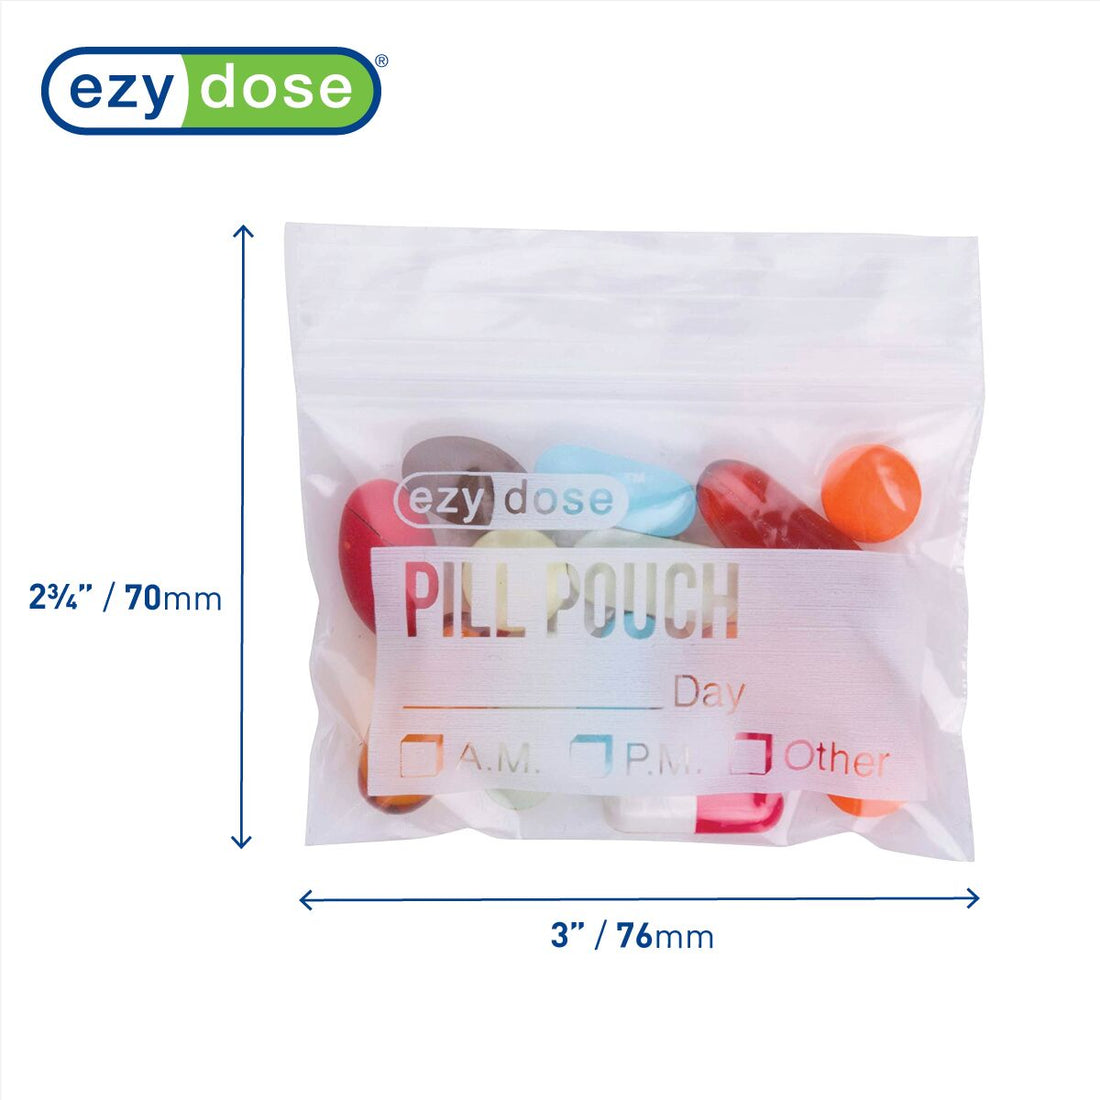 Pill pouch dimensions